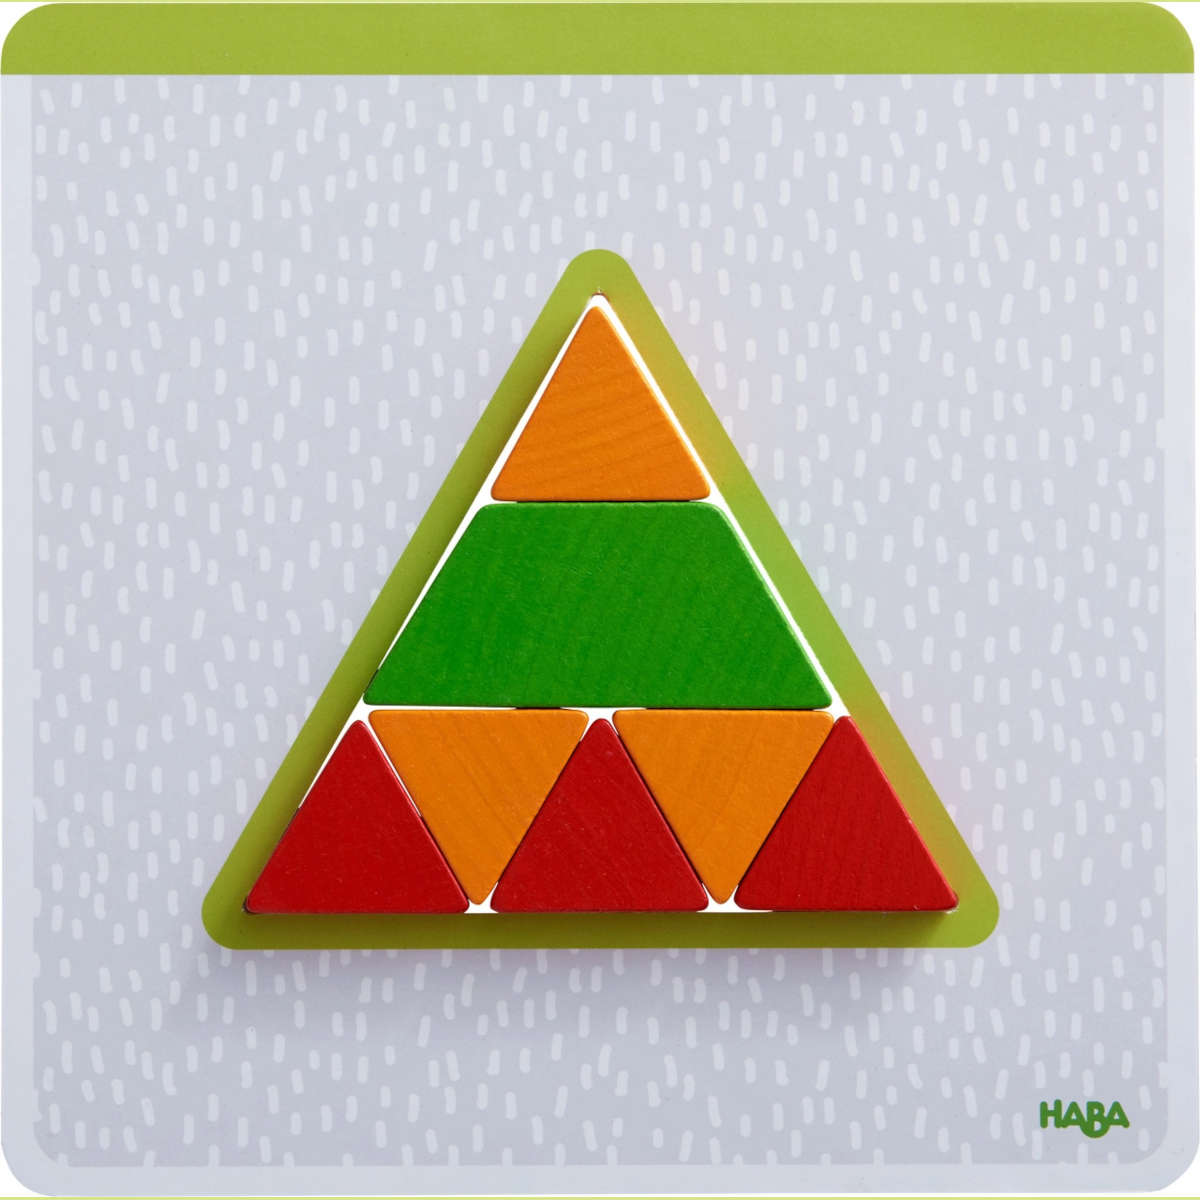 Haba Colorful Shapes Arranging Game